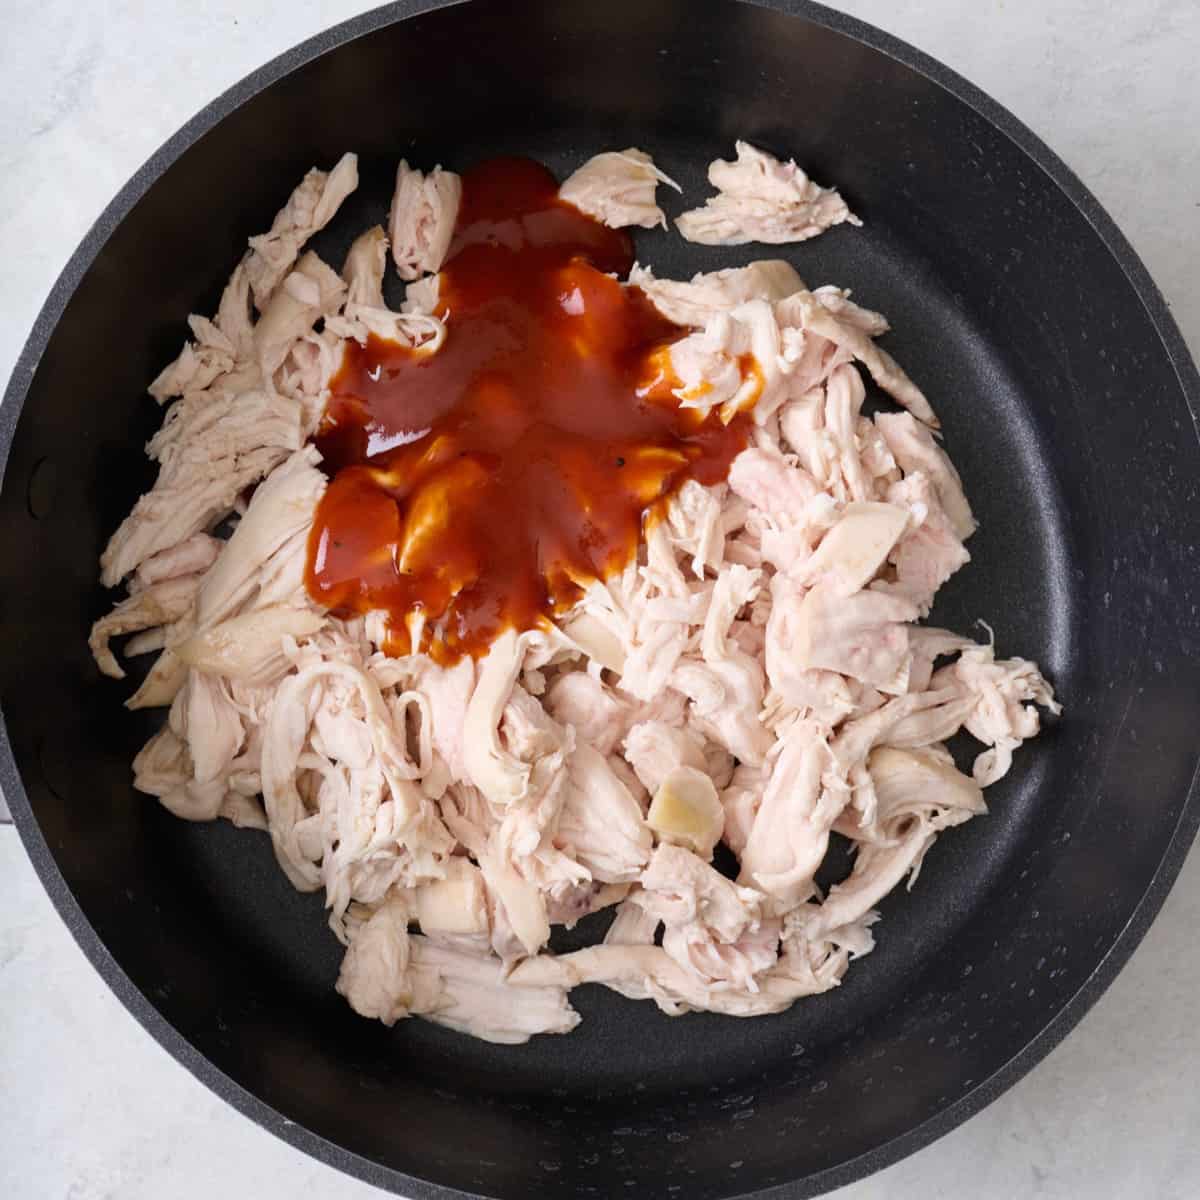 Bbq sauce on top of shredded chicken before combining.